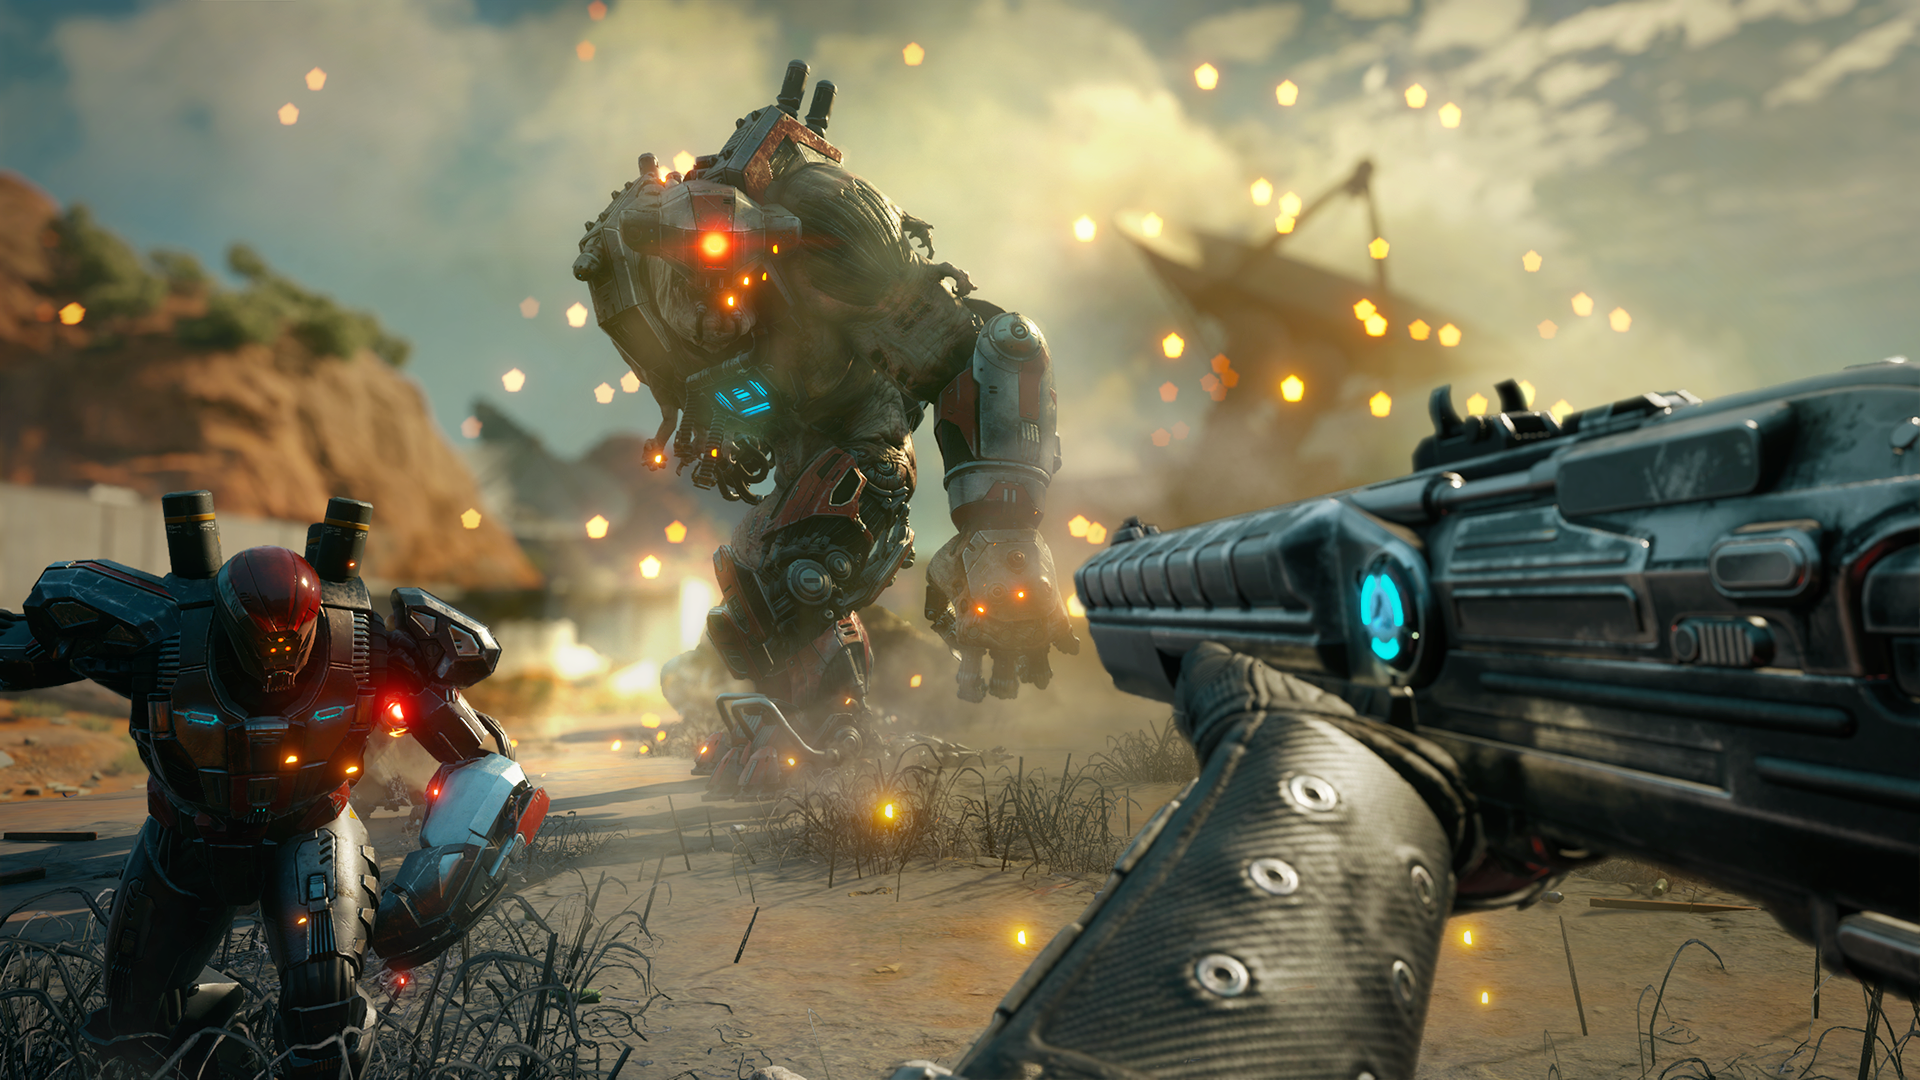 Image for Rage 2 is targeting 60fps on PS4 Pro, Xbox One X